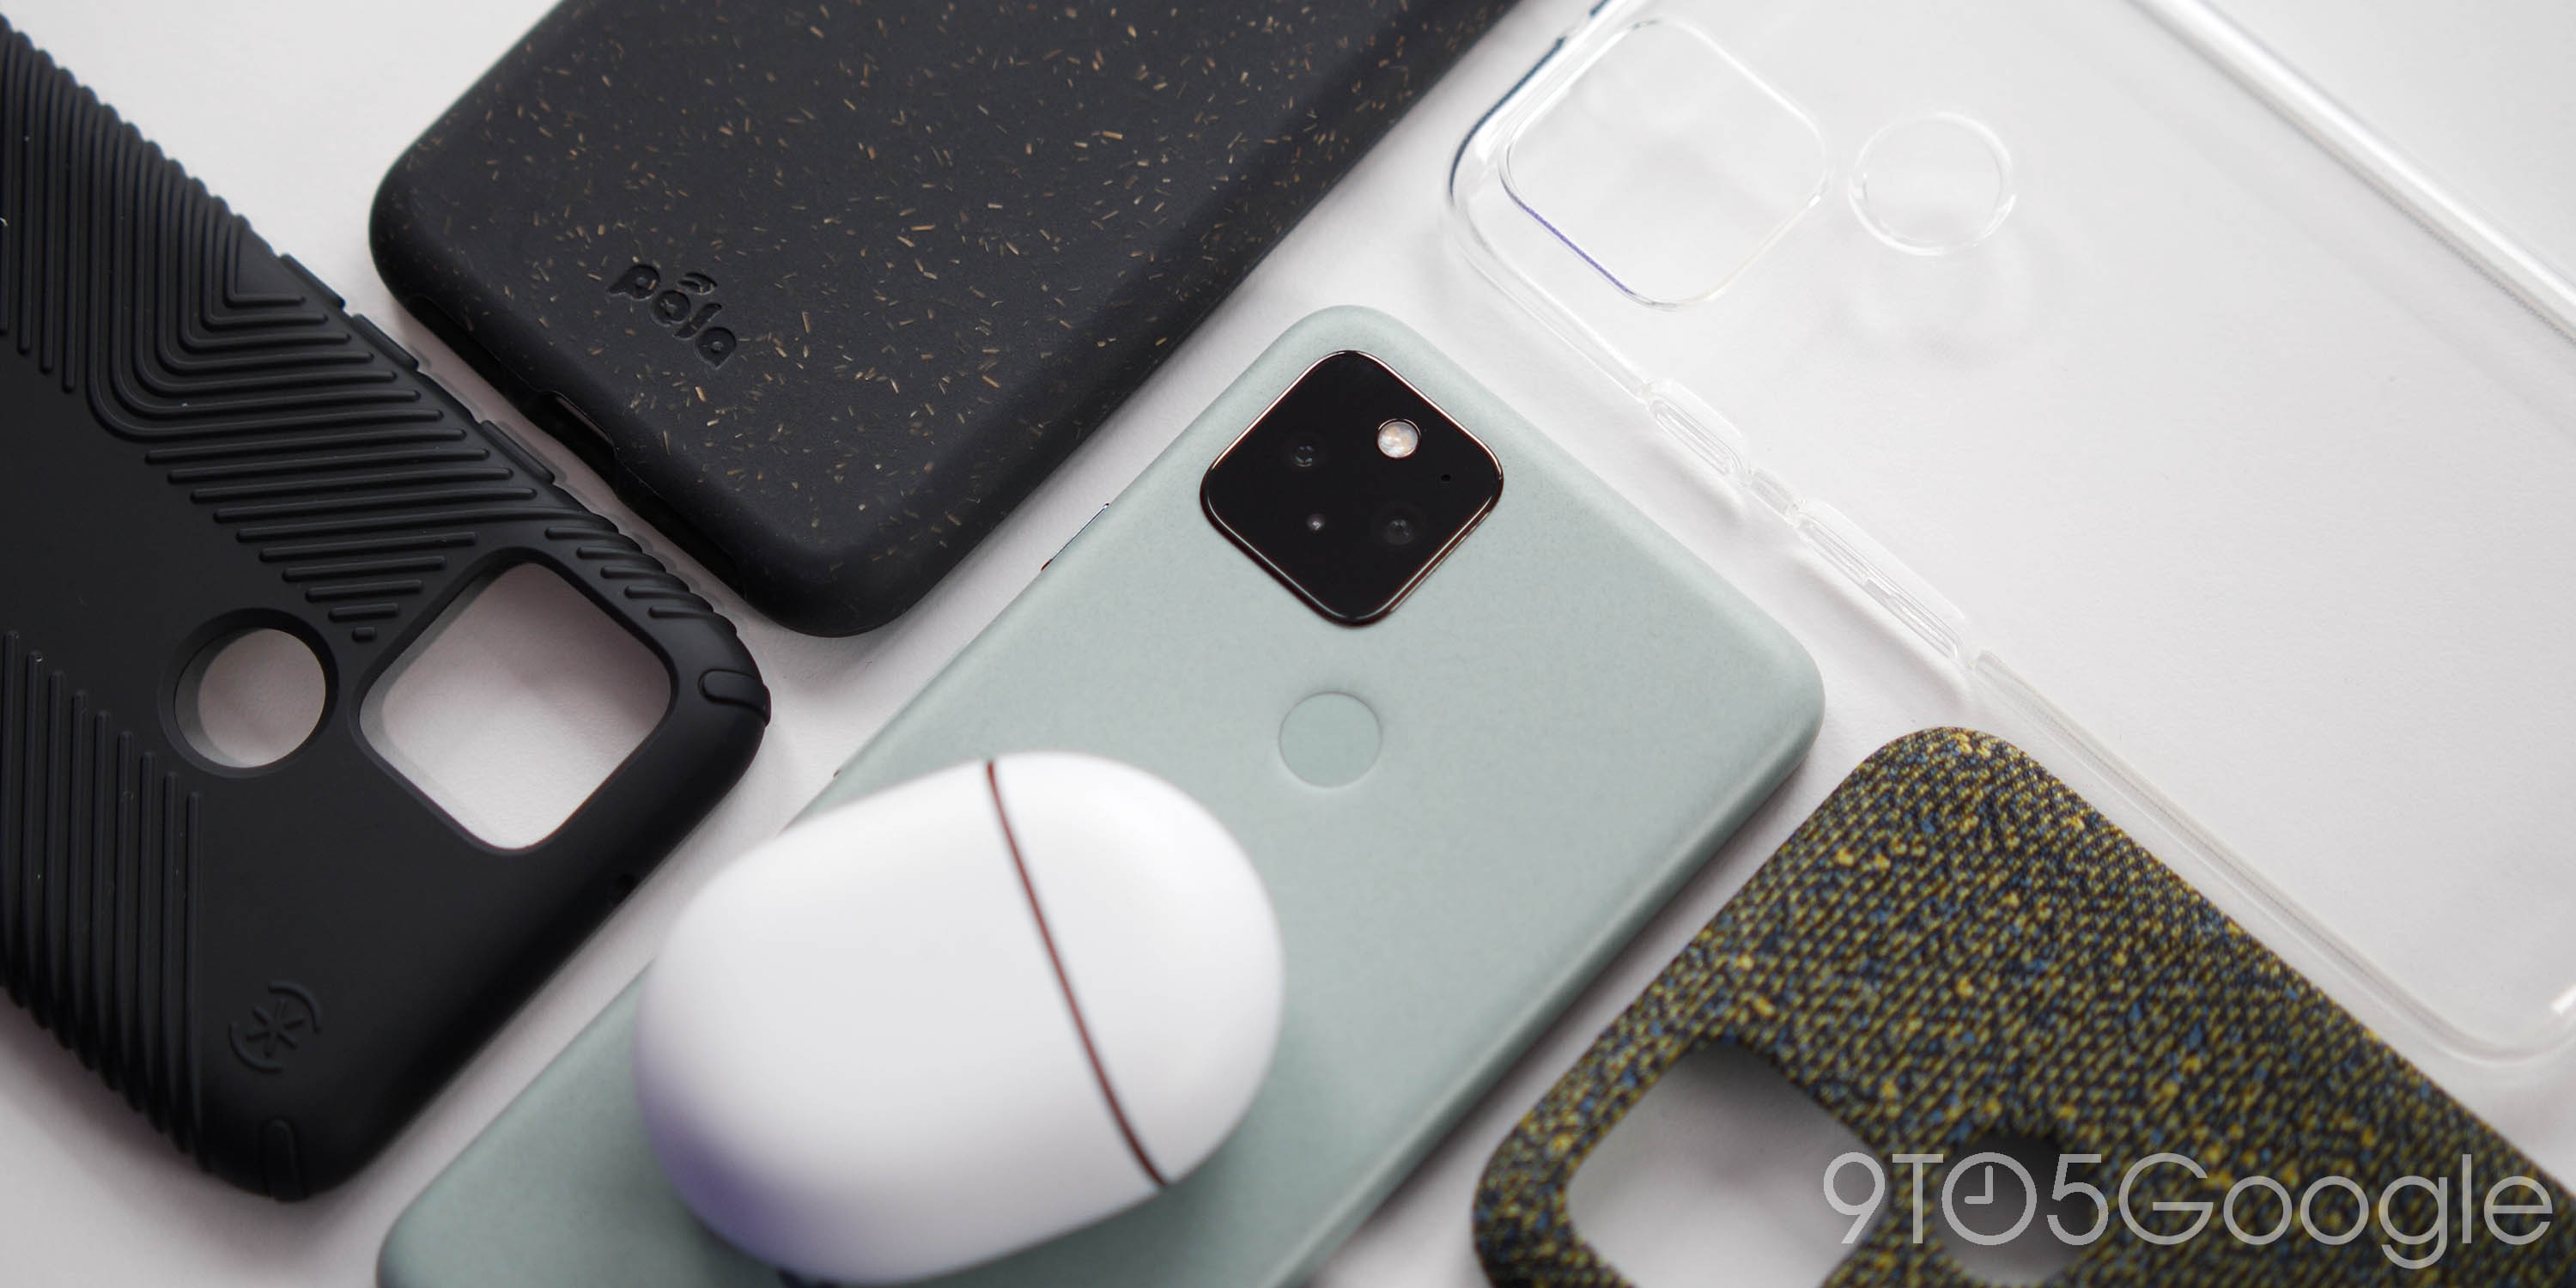 The best cases and covers for your Google Pixel 5 [Video]